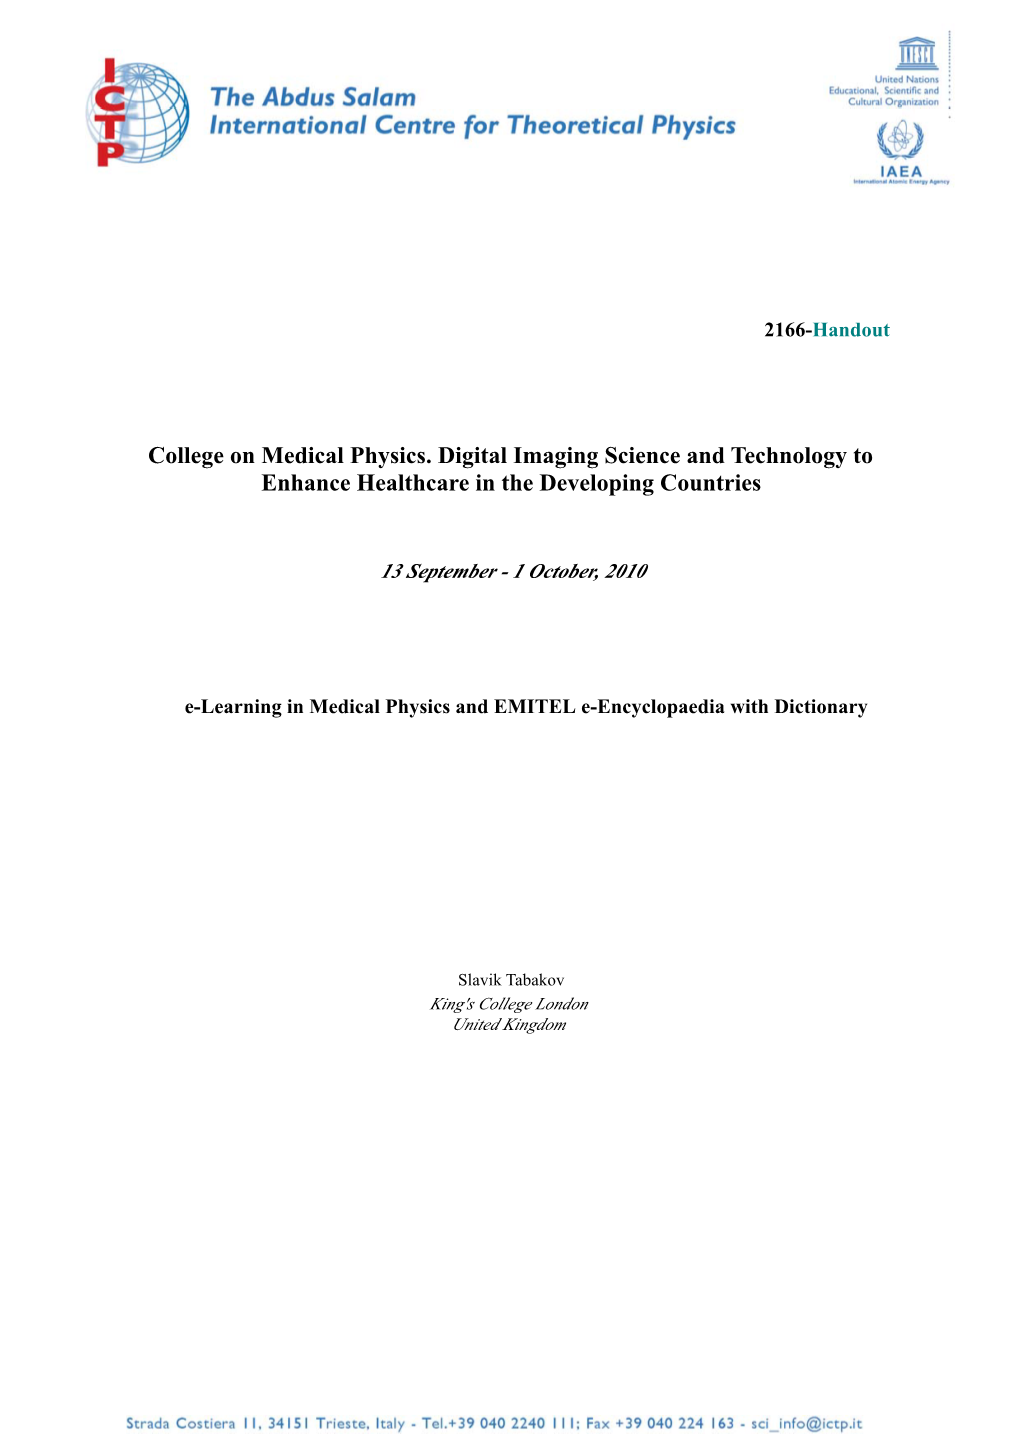 E-Learning in Medical Physics and EMITEL E-Encyclopaedia W Ith